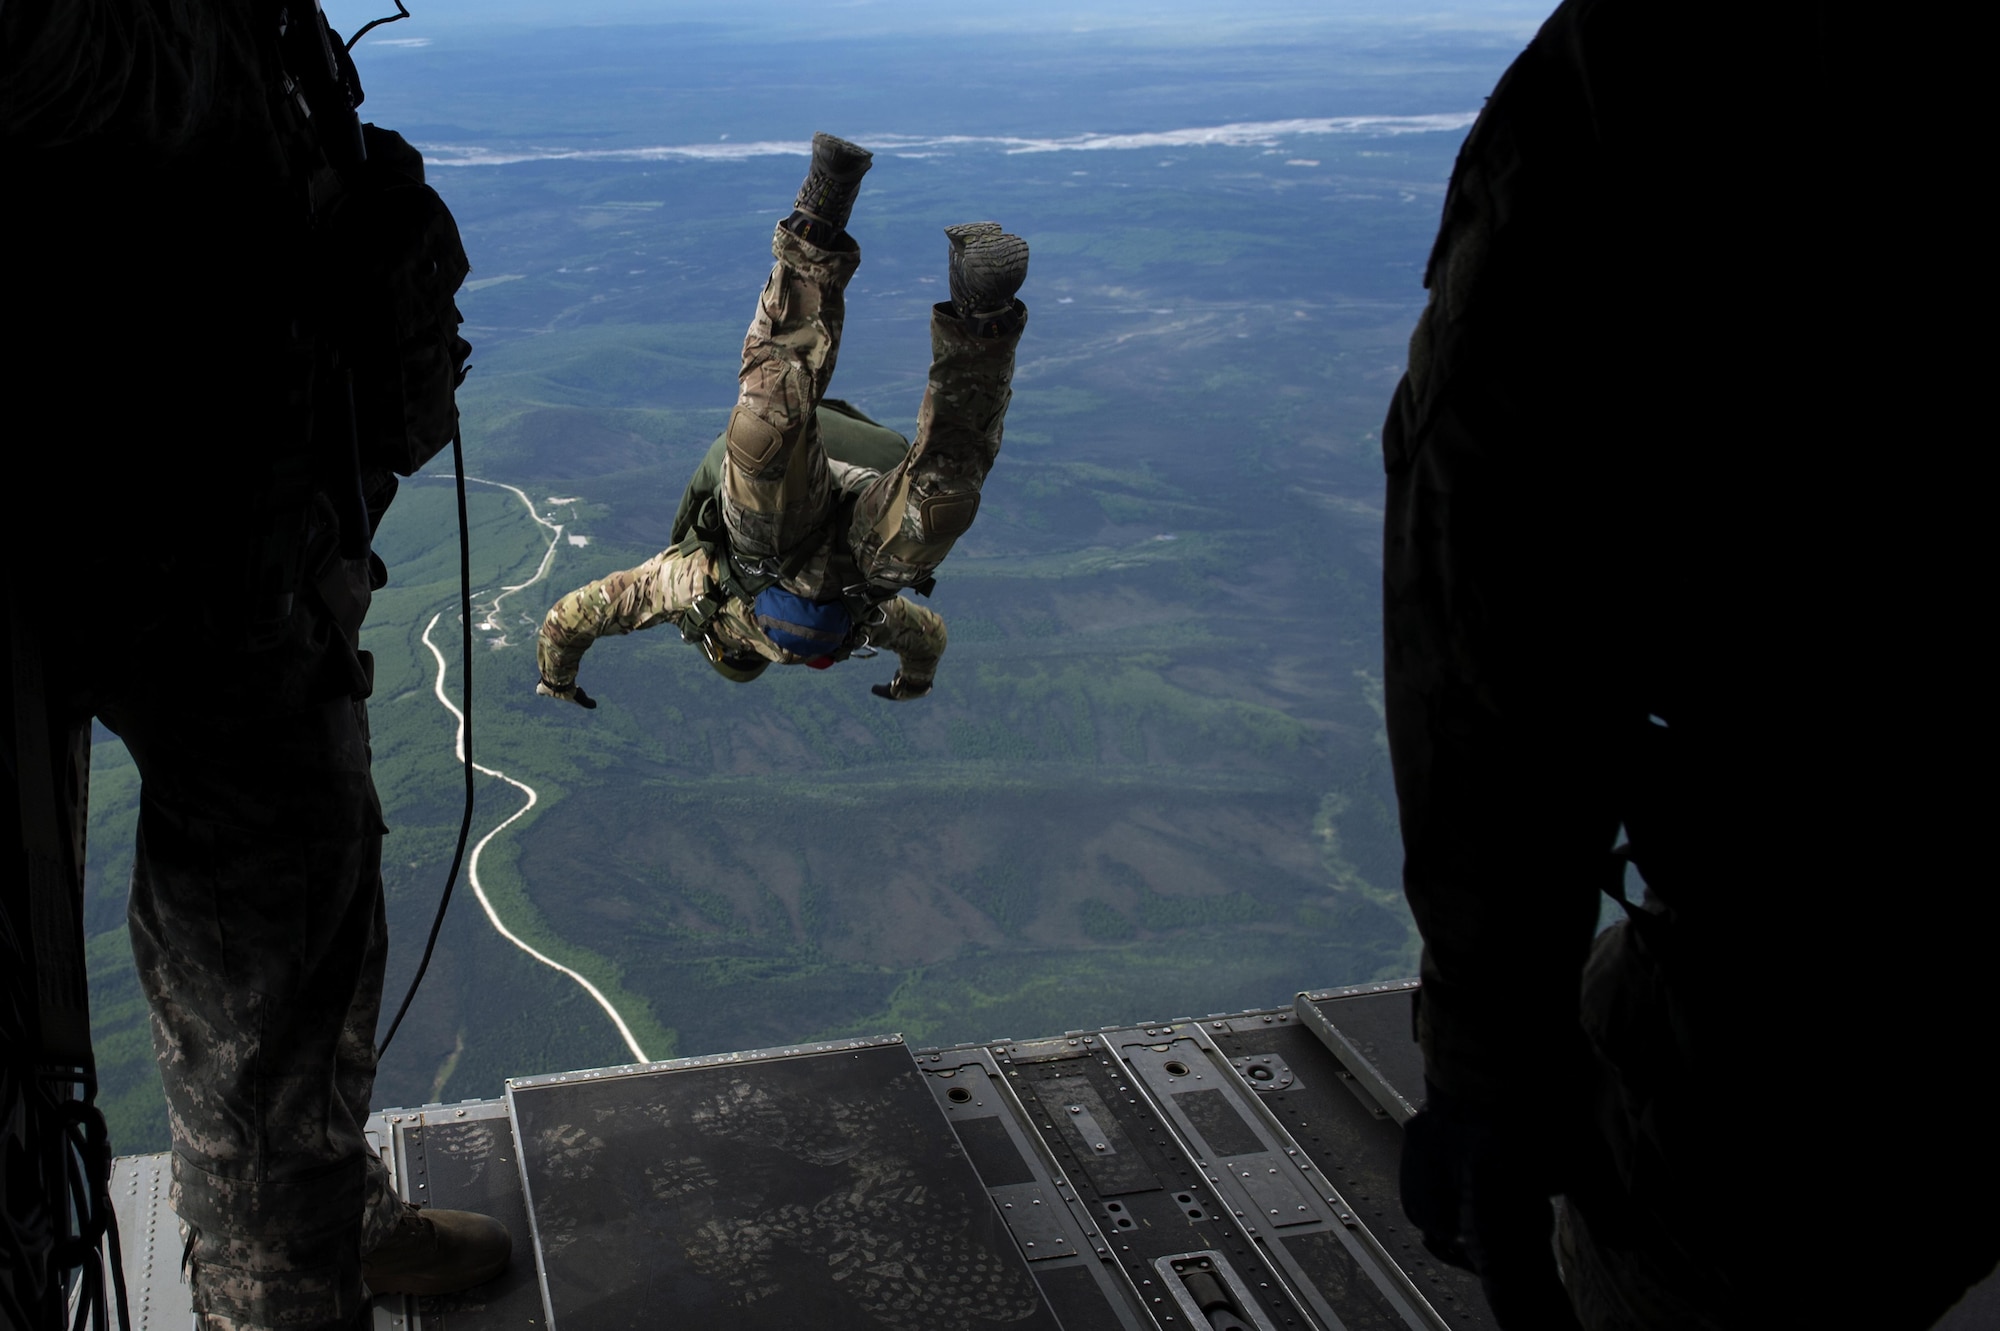 A tactical air control party member from the 116th Air Support Special Operations Squadron, jumps out of a CH-47 Chinook for a training mission during Red Flag-Alaska 17-2, June 7, 2017, at Eielson Air Force Base, Alaska. Red Flag-Alaska provides an optimal training environment in the Indo-Asia Pacific Region and focuses on improving ground, space, and cyberspace combat readiness and interoperability of U.S. and international forces. (U.S. Air Force photo/Staff Sgt. Paul Labbe)